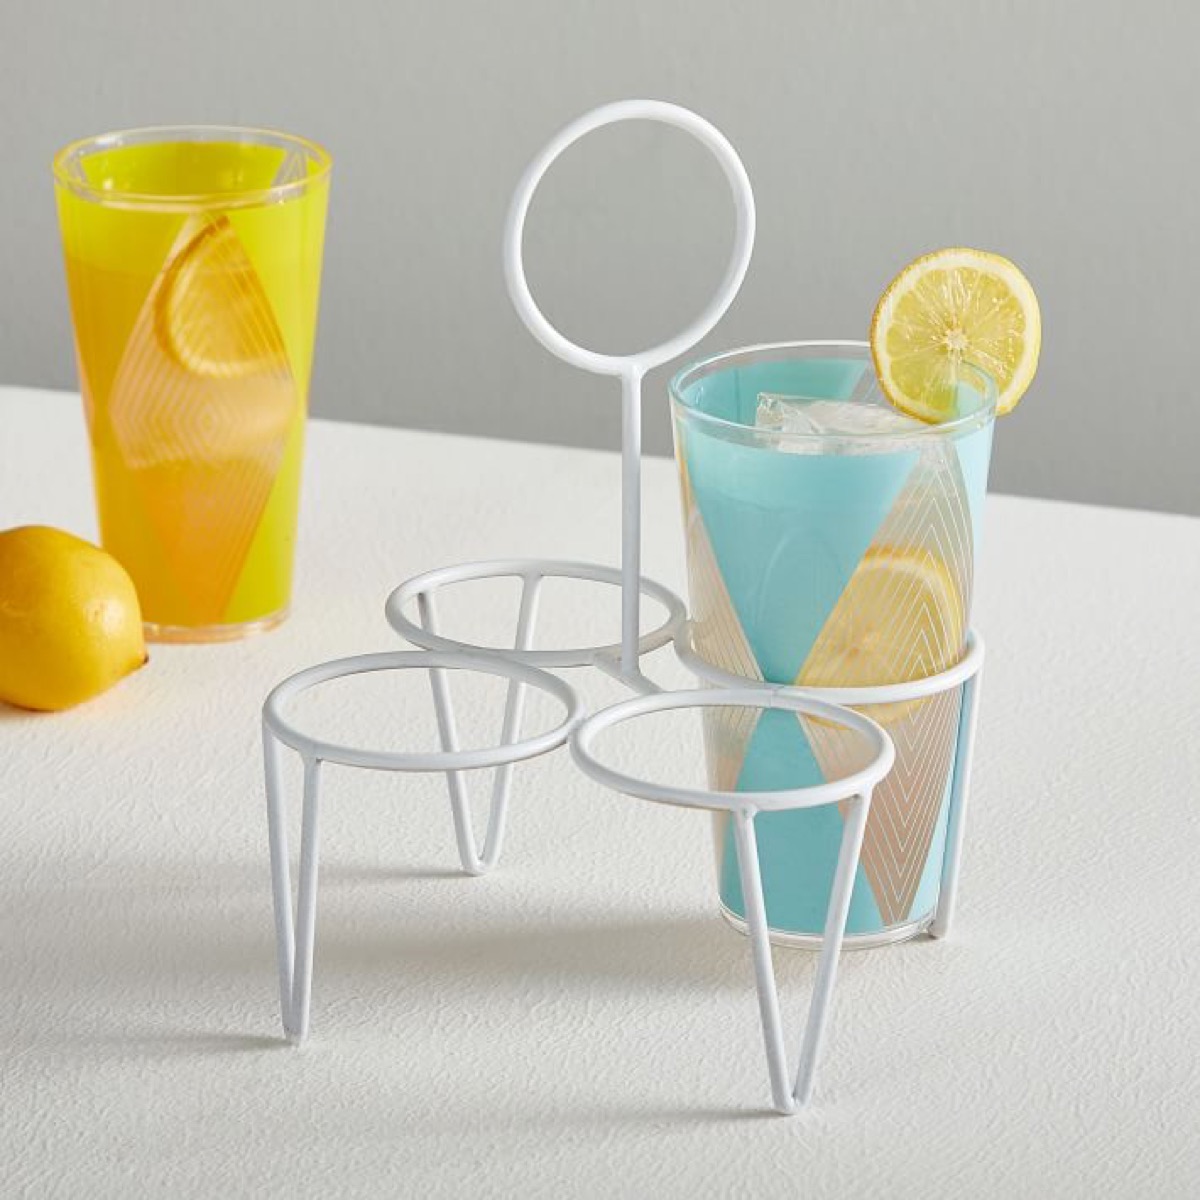 White steel drink caddy with glass